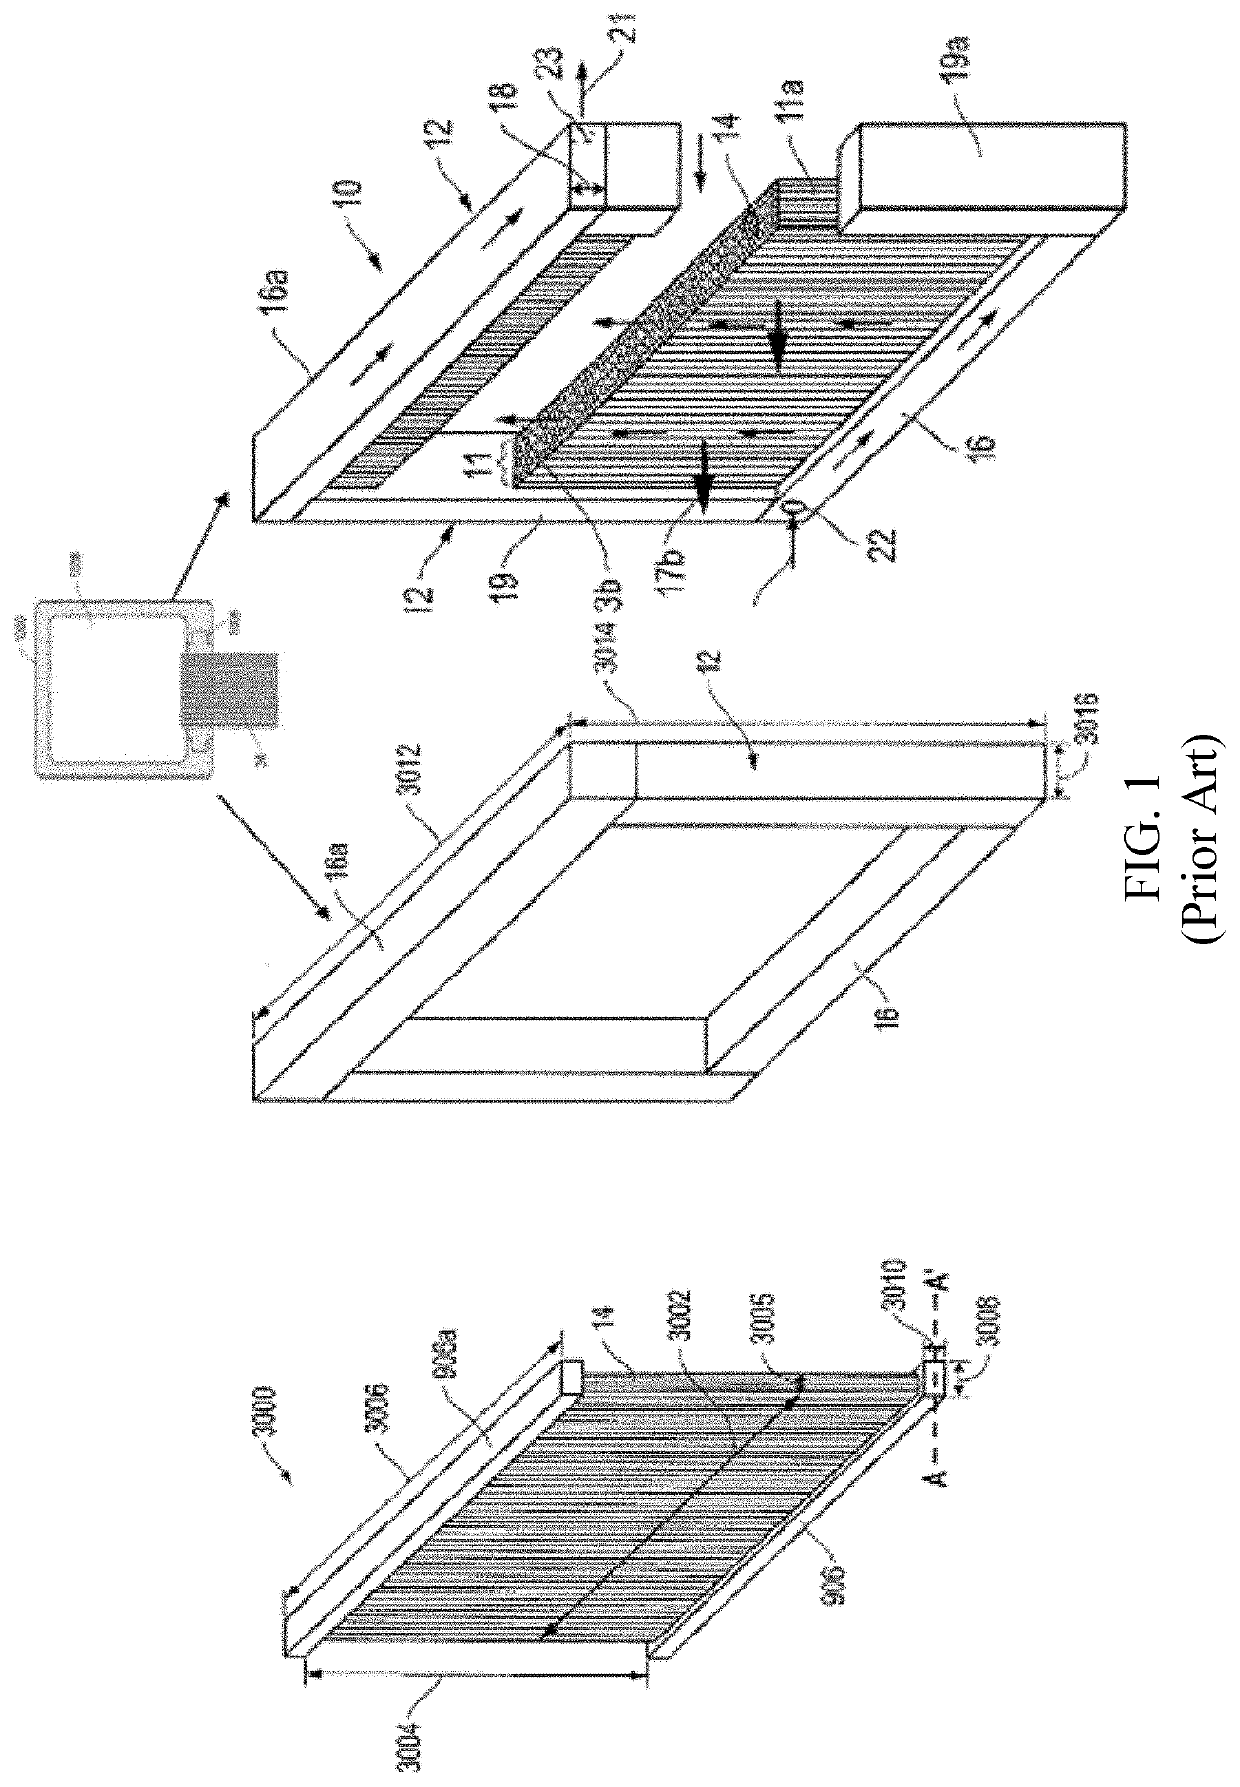 Ecologically sustainable hydraulic fracturing system and method